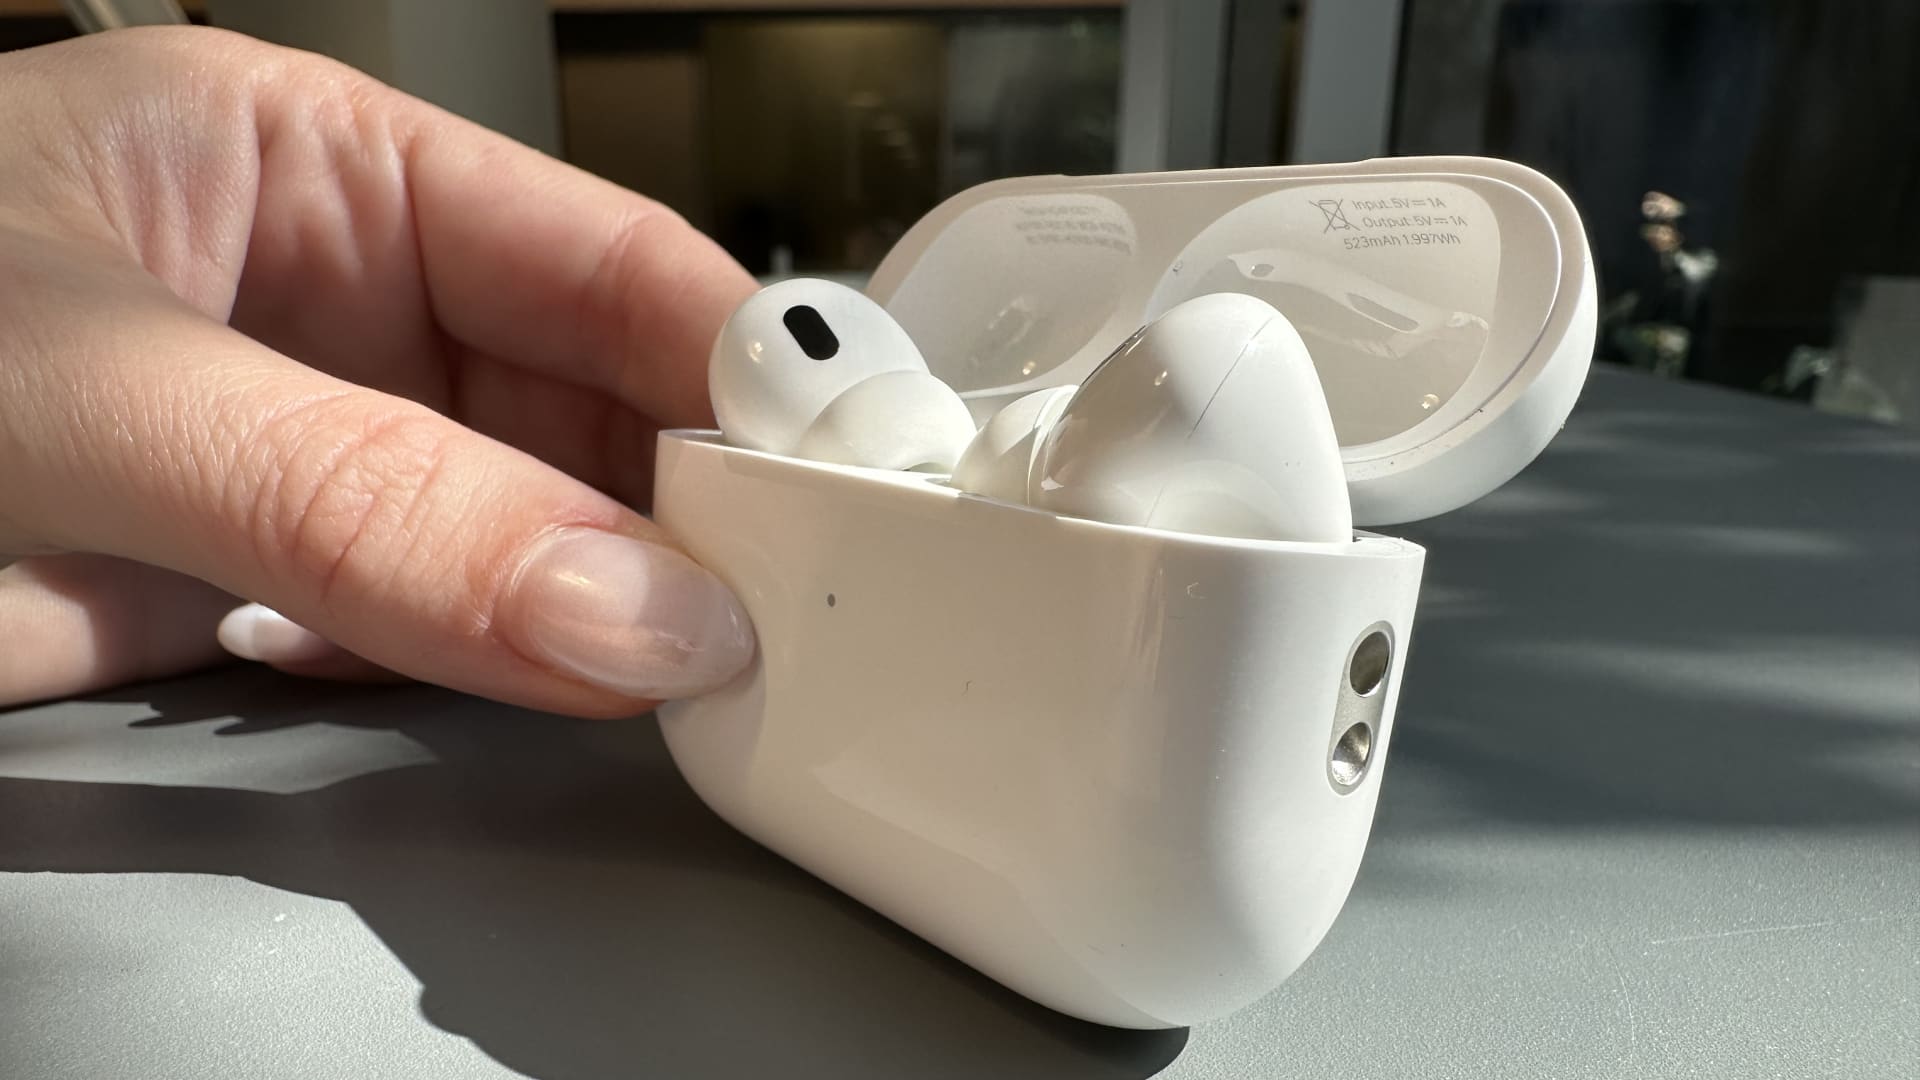 Apple’s new AirPods Pro are worth the 9 even if you already own the older version